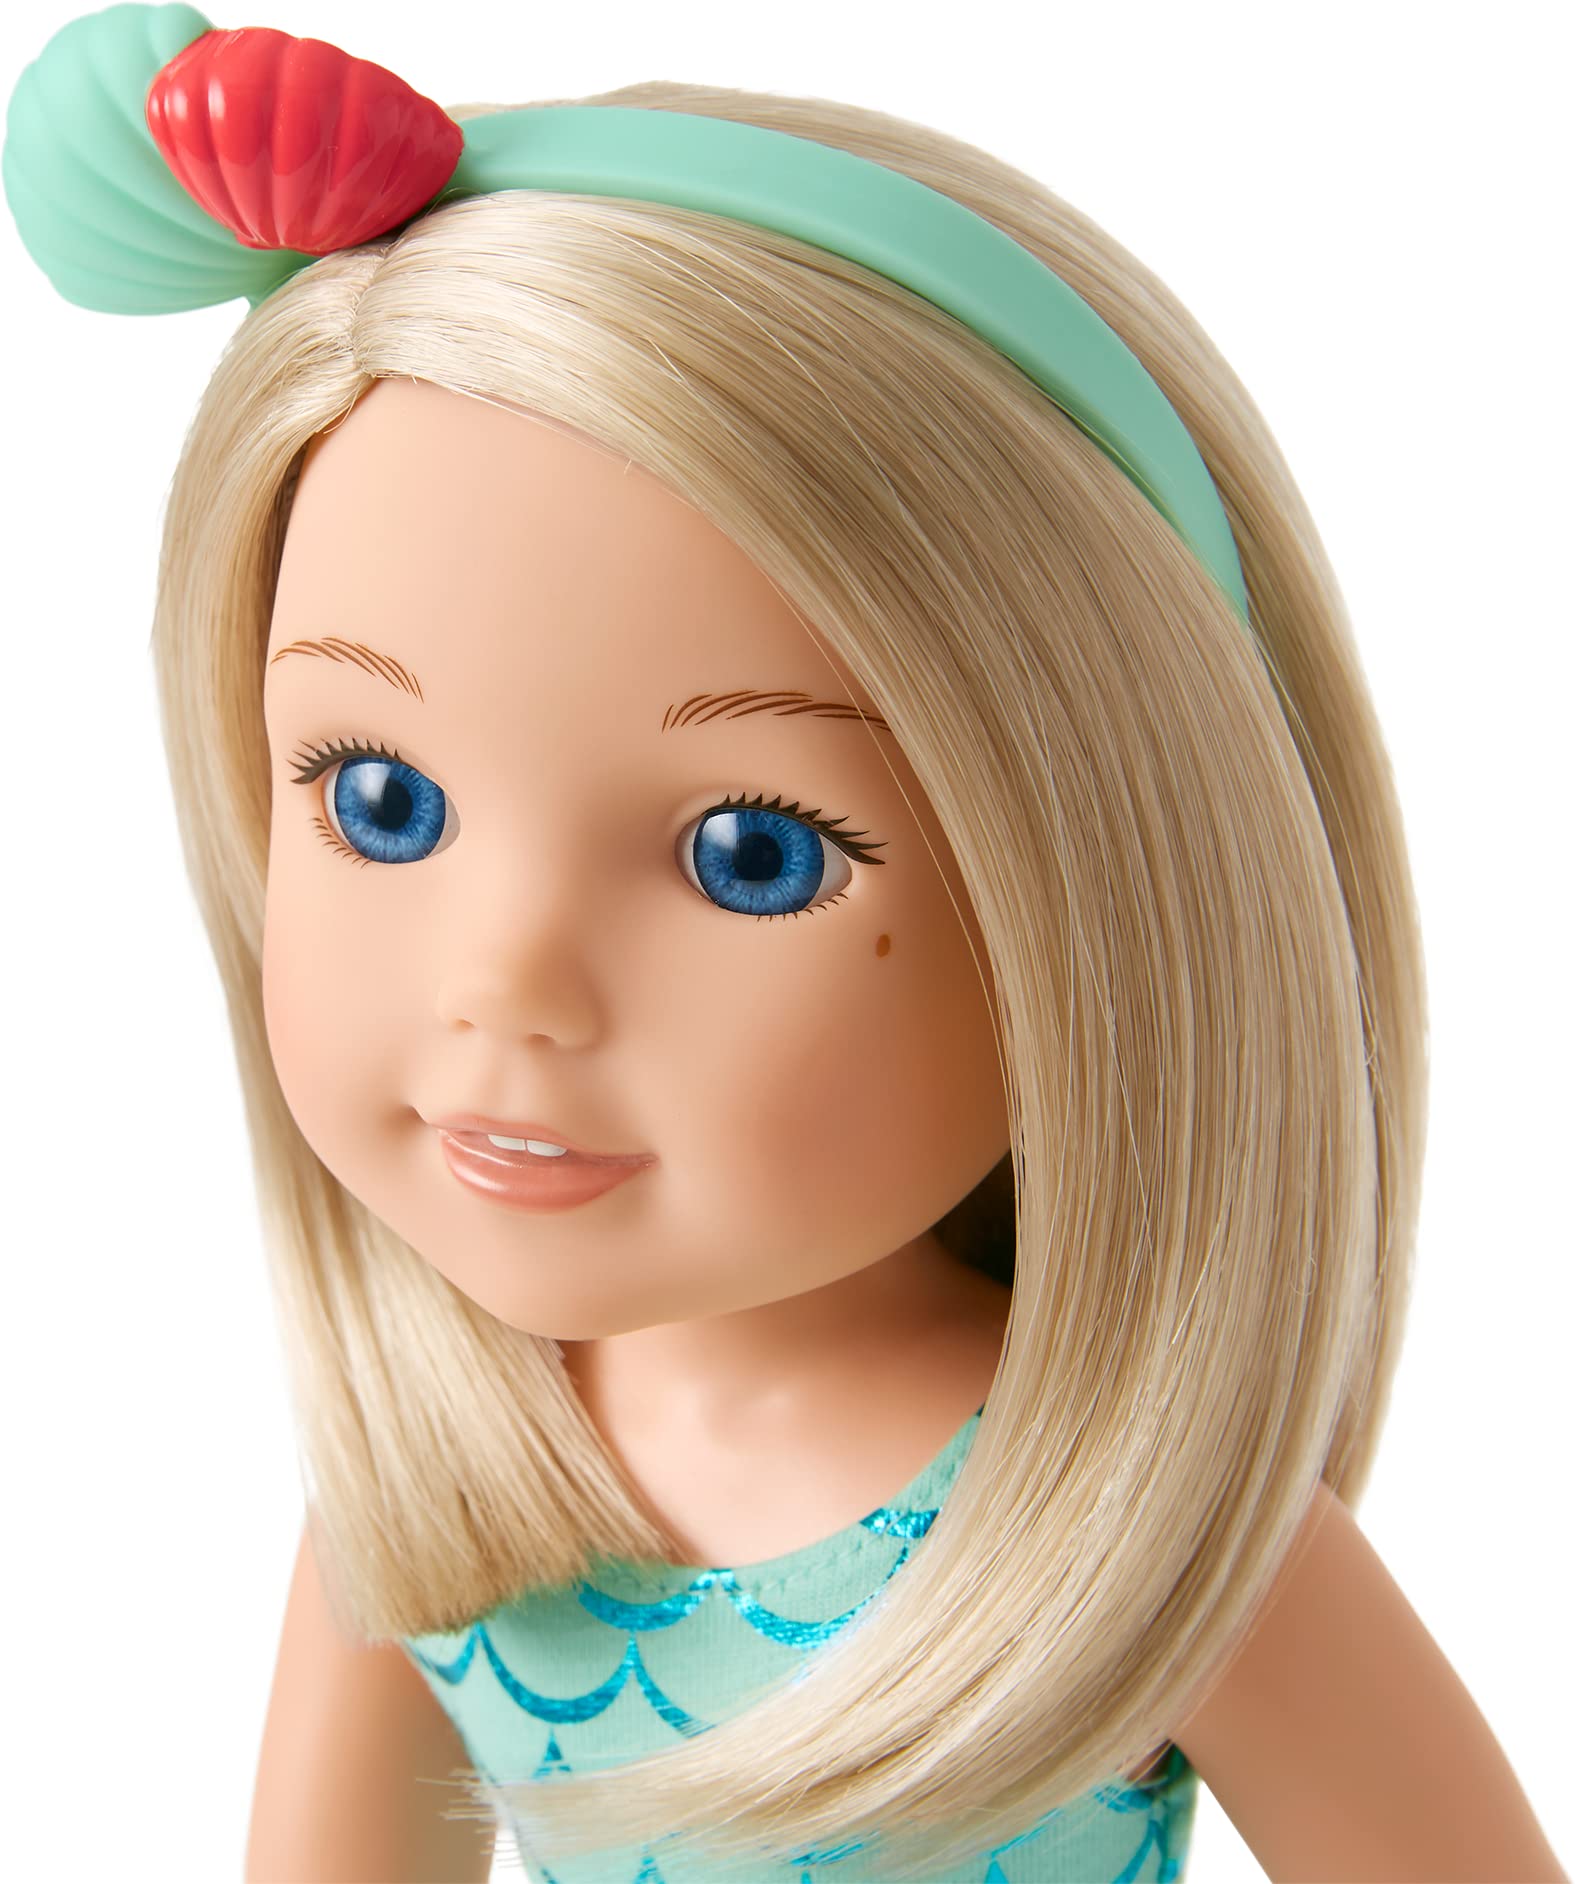 American Girl WellieWishers 14.5-inch Camille Doll with Blue Leotard, Mermaid Skirt, Headband, and Boots, For Ages 4+